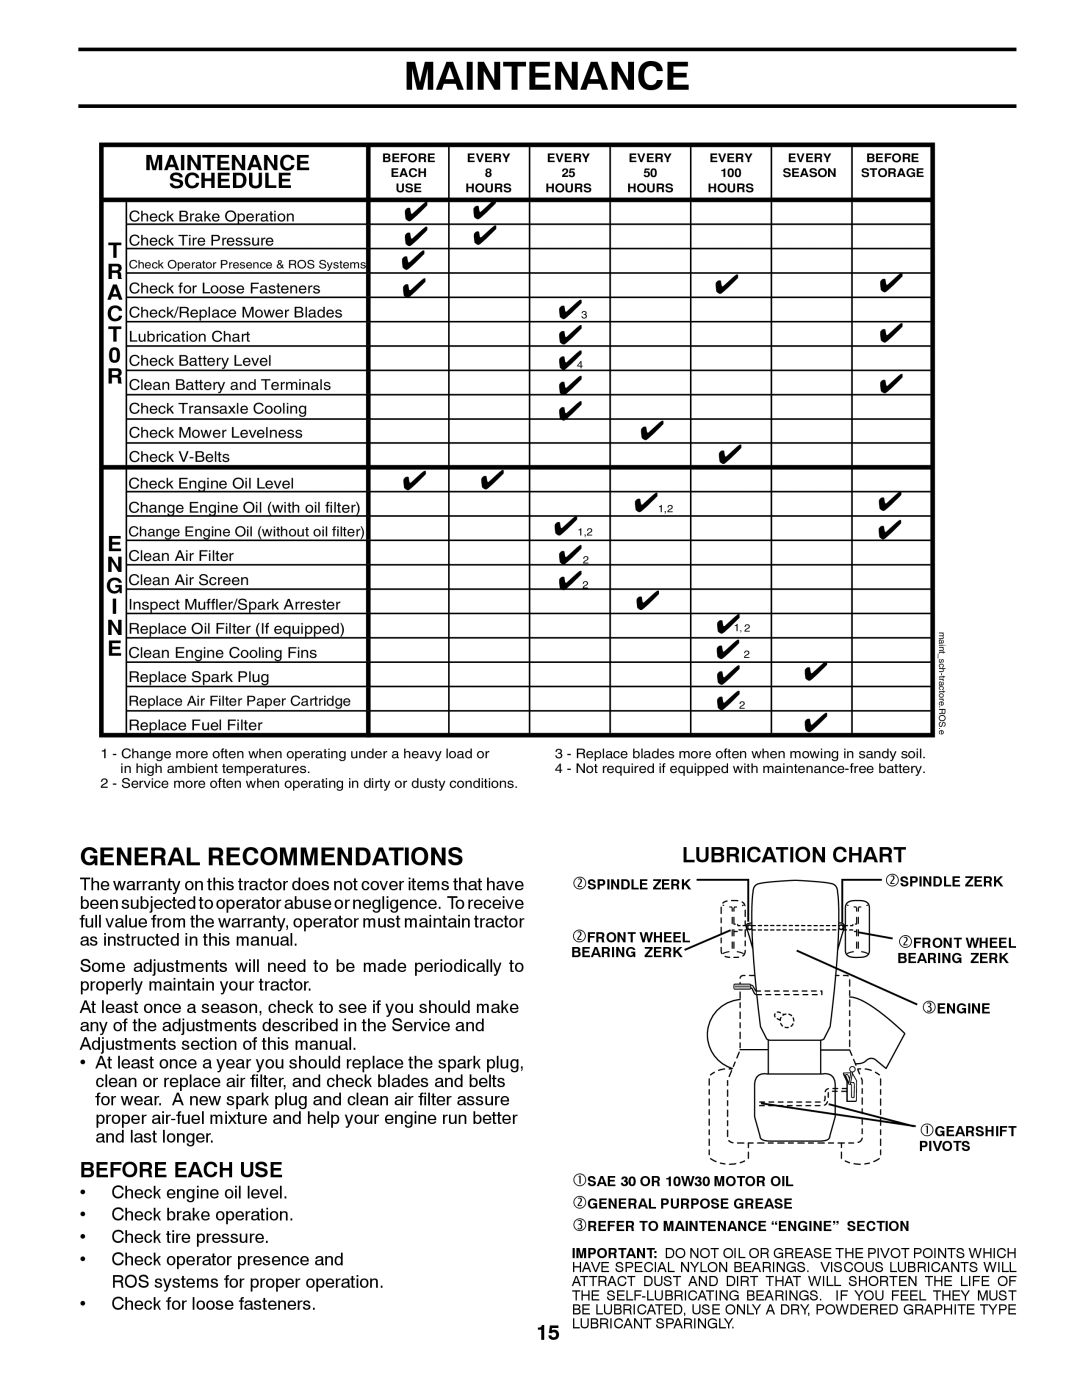 Murray 96017000500 manual Maintenance, General Recommendations, Schedule, Before Each Use, Lubrication Chart 